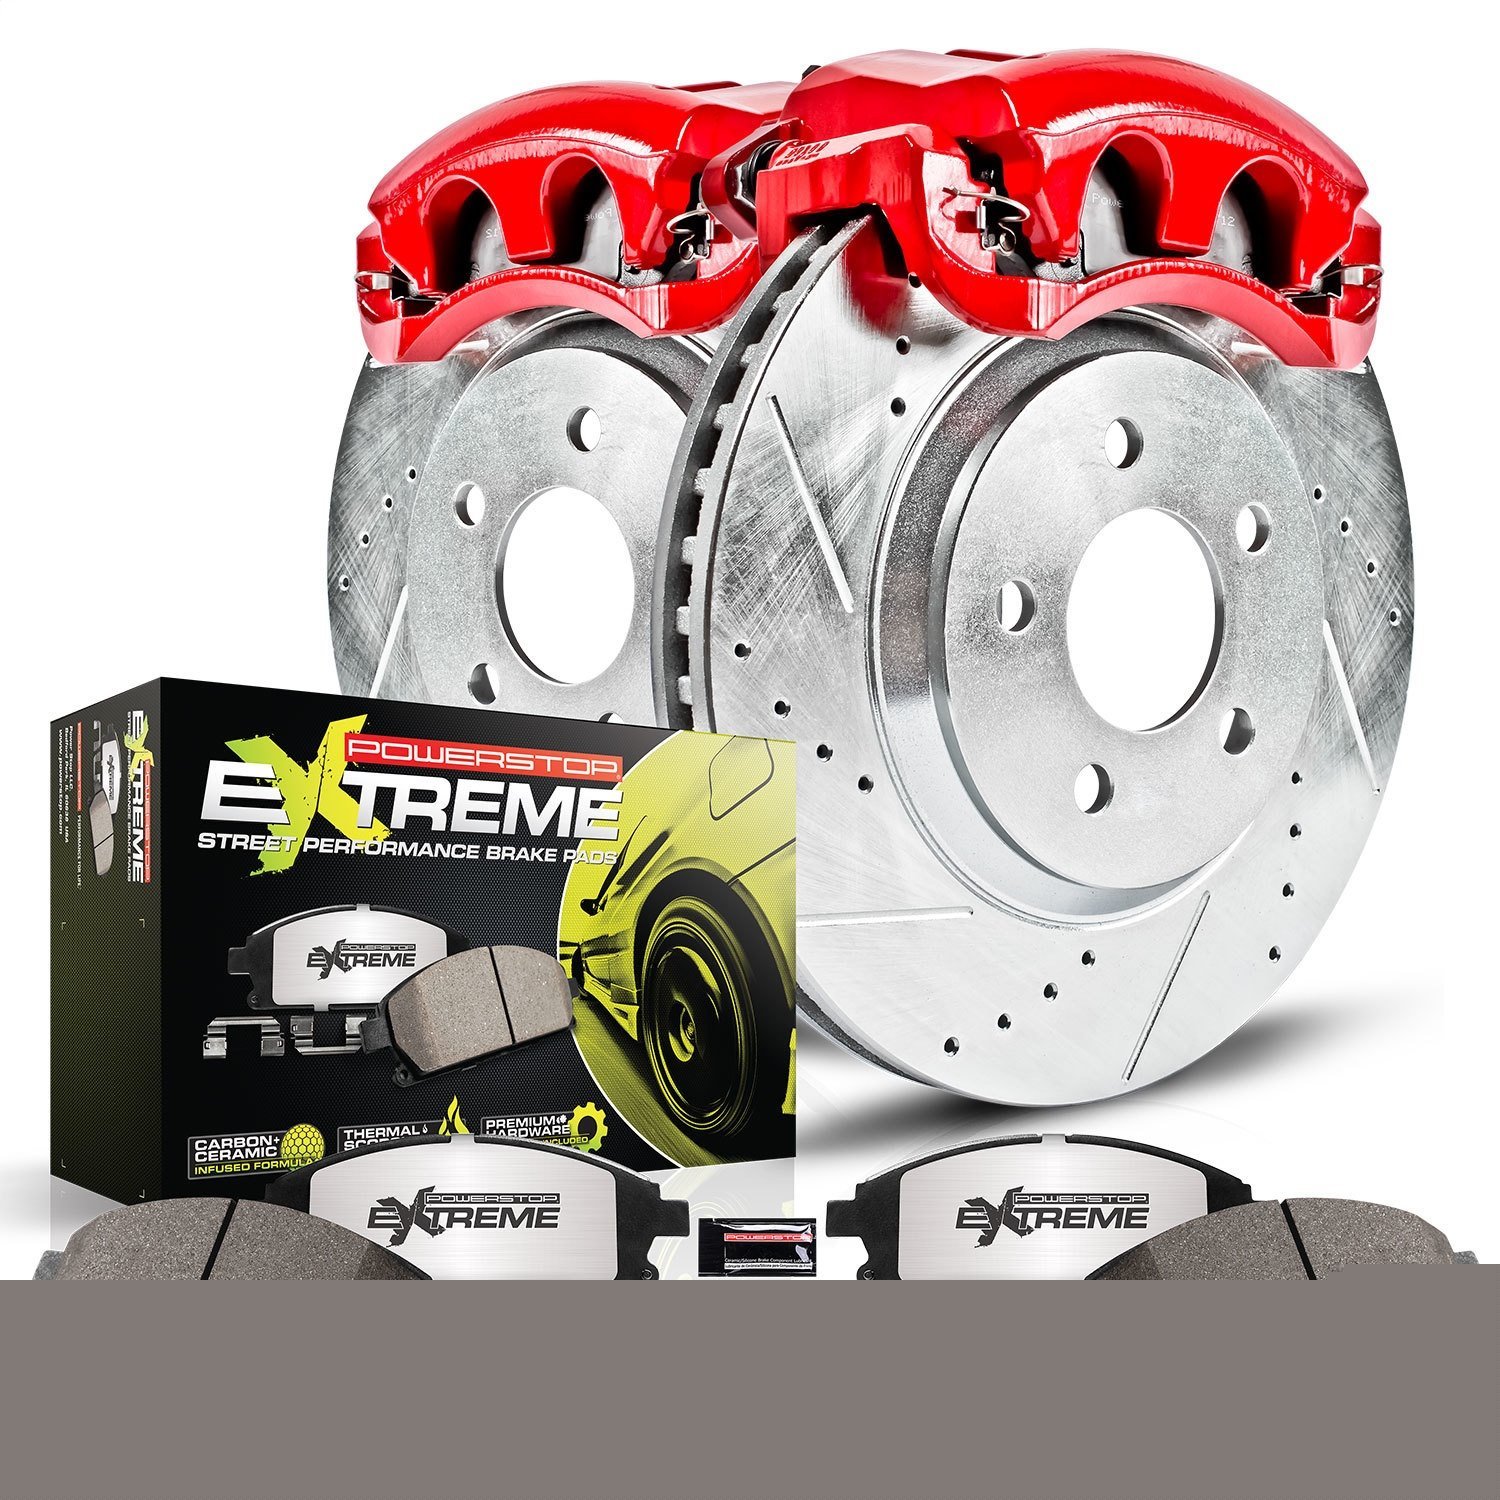 Street Warrior Brake Upgrade Kit Cross-Drilled and Slotted Rotors